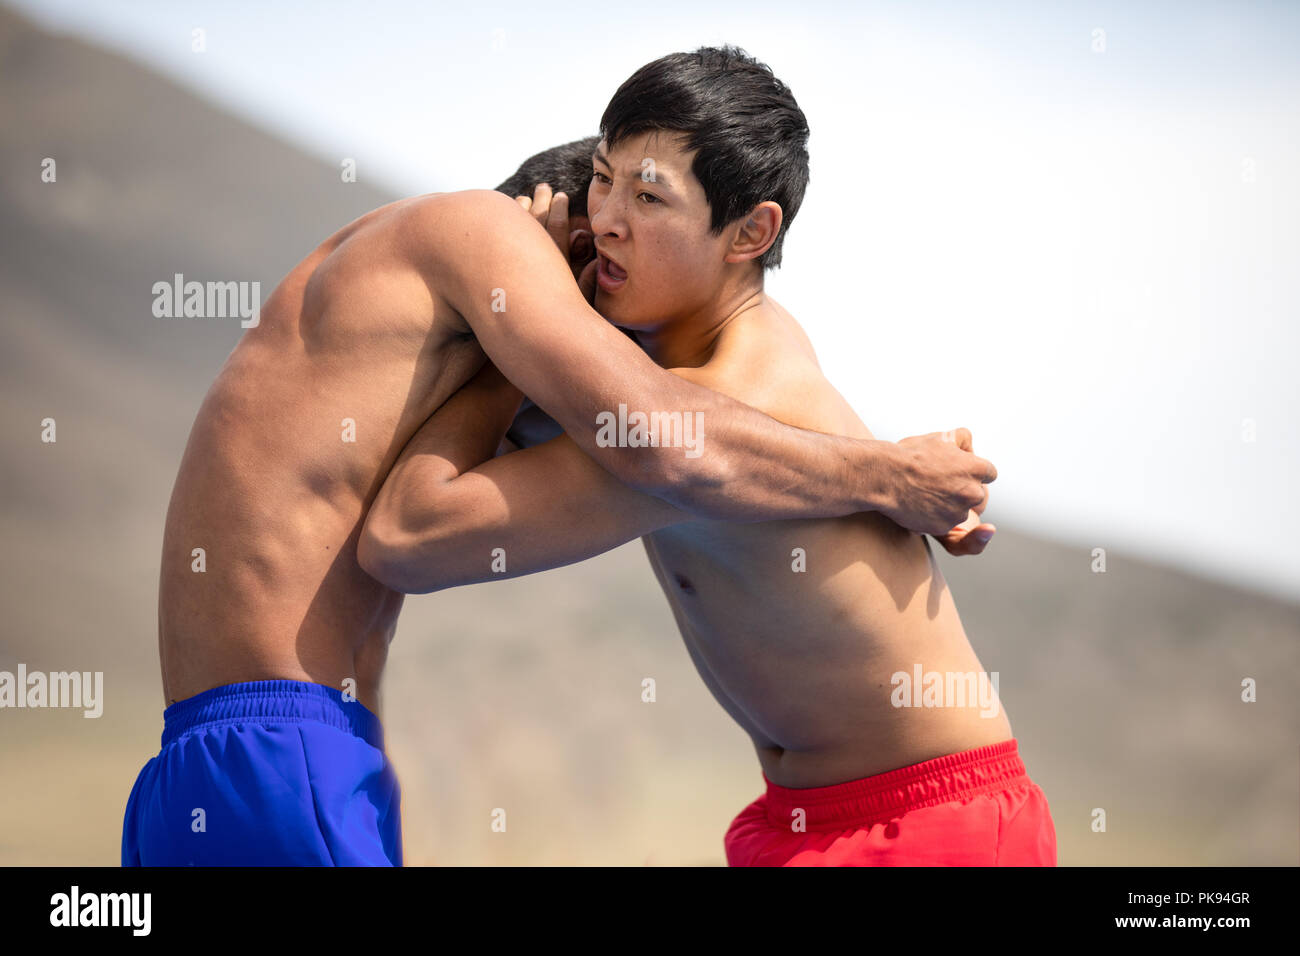 Lake Issyk-Kul, Kyrgyzstan - Sep 6, 2018: Close-up of wo young men wrestling outdoors during 2018 World Nomad Games. Stock Photo